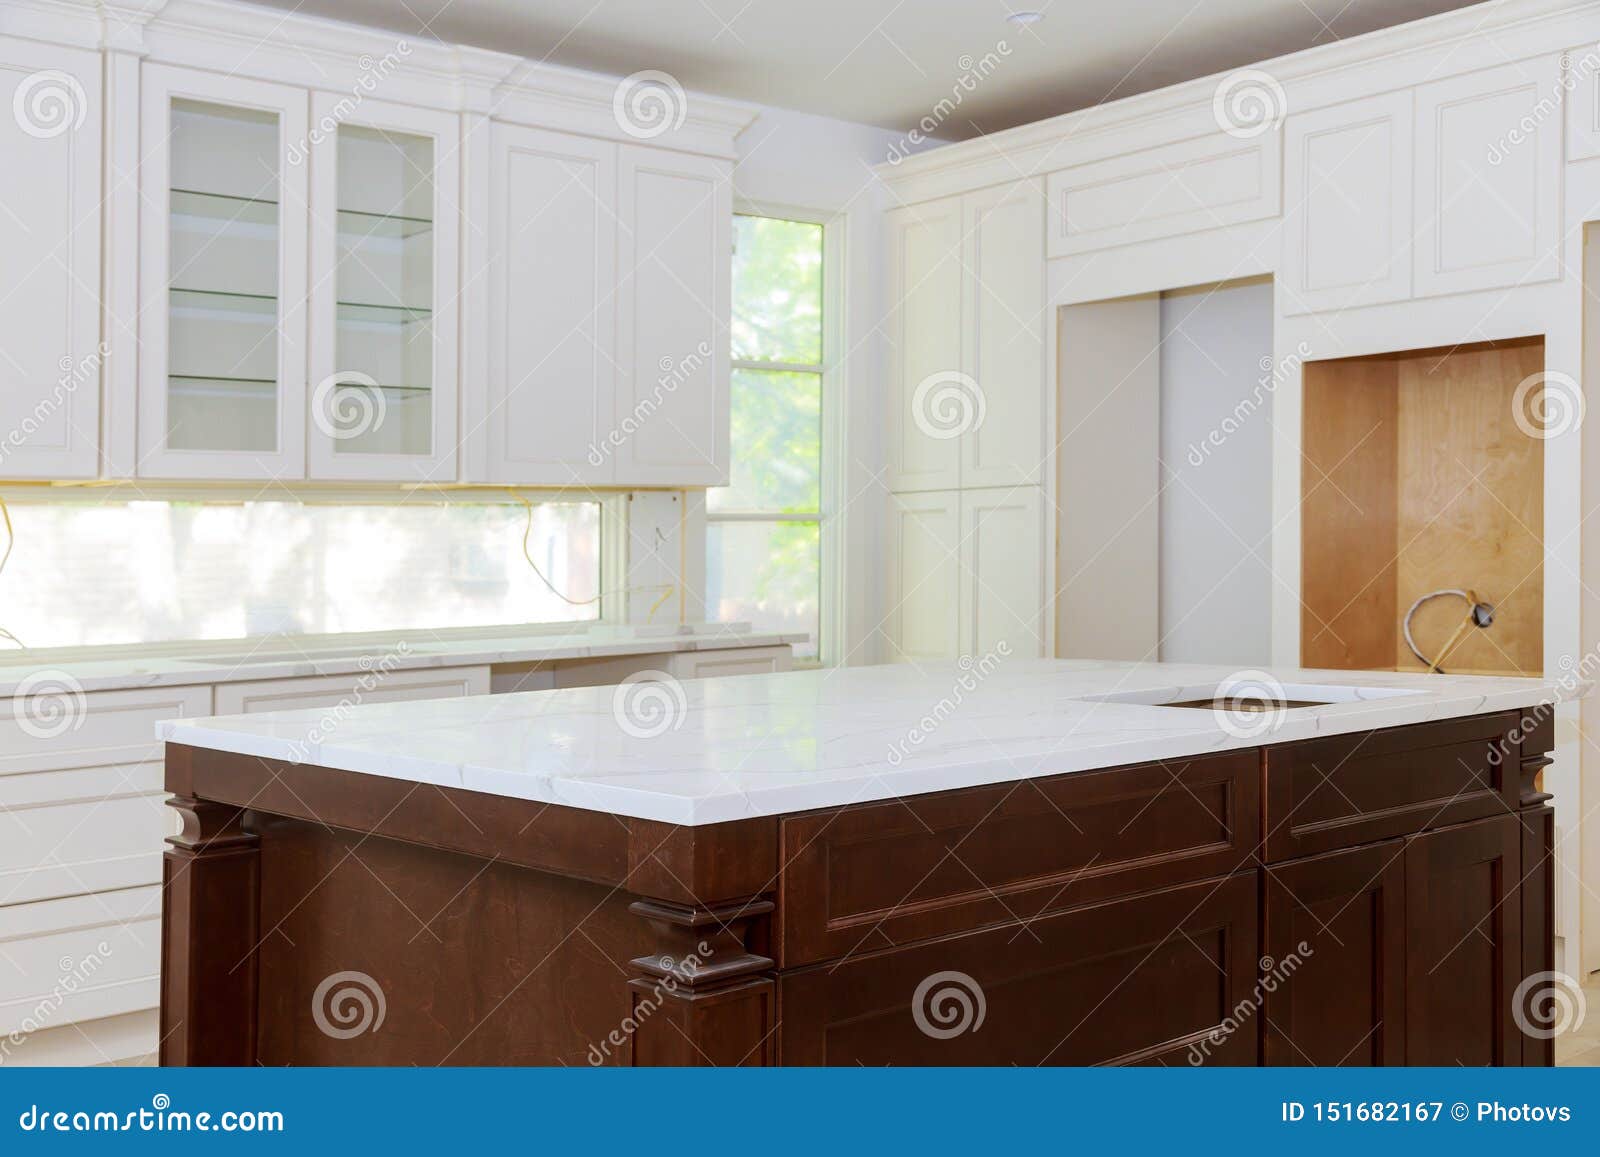 White Of Kitchen Wooden Cabinets With Contemporary Look Stock